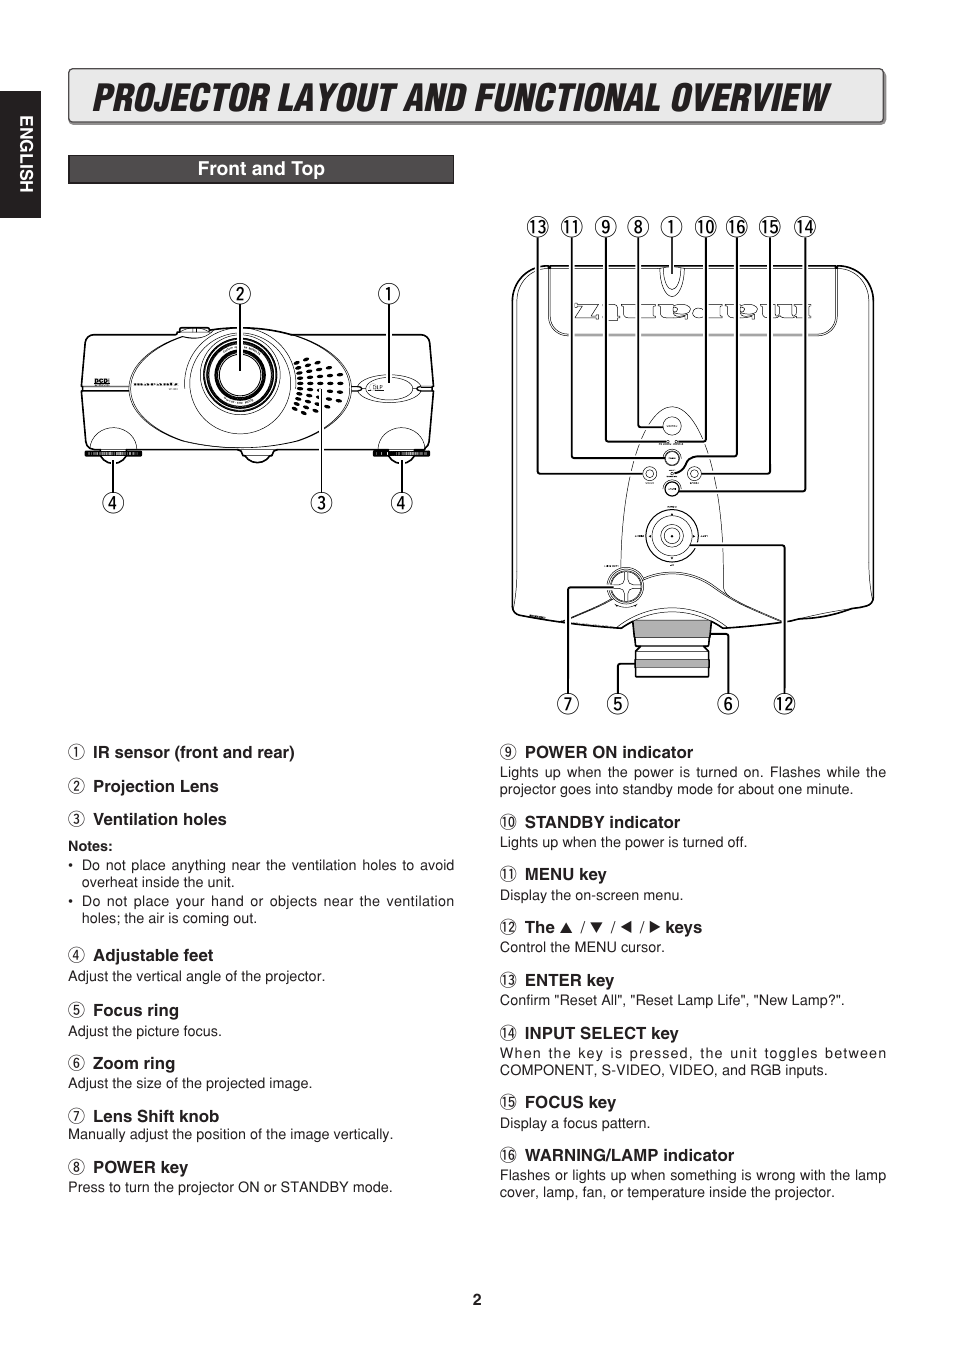 Projector layout and functional overview, Front and top | Marantz VP-12S1s User Manual | Page 6 / 30